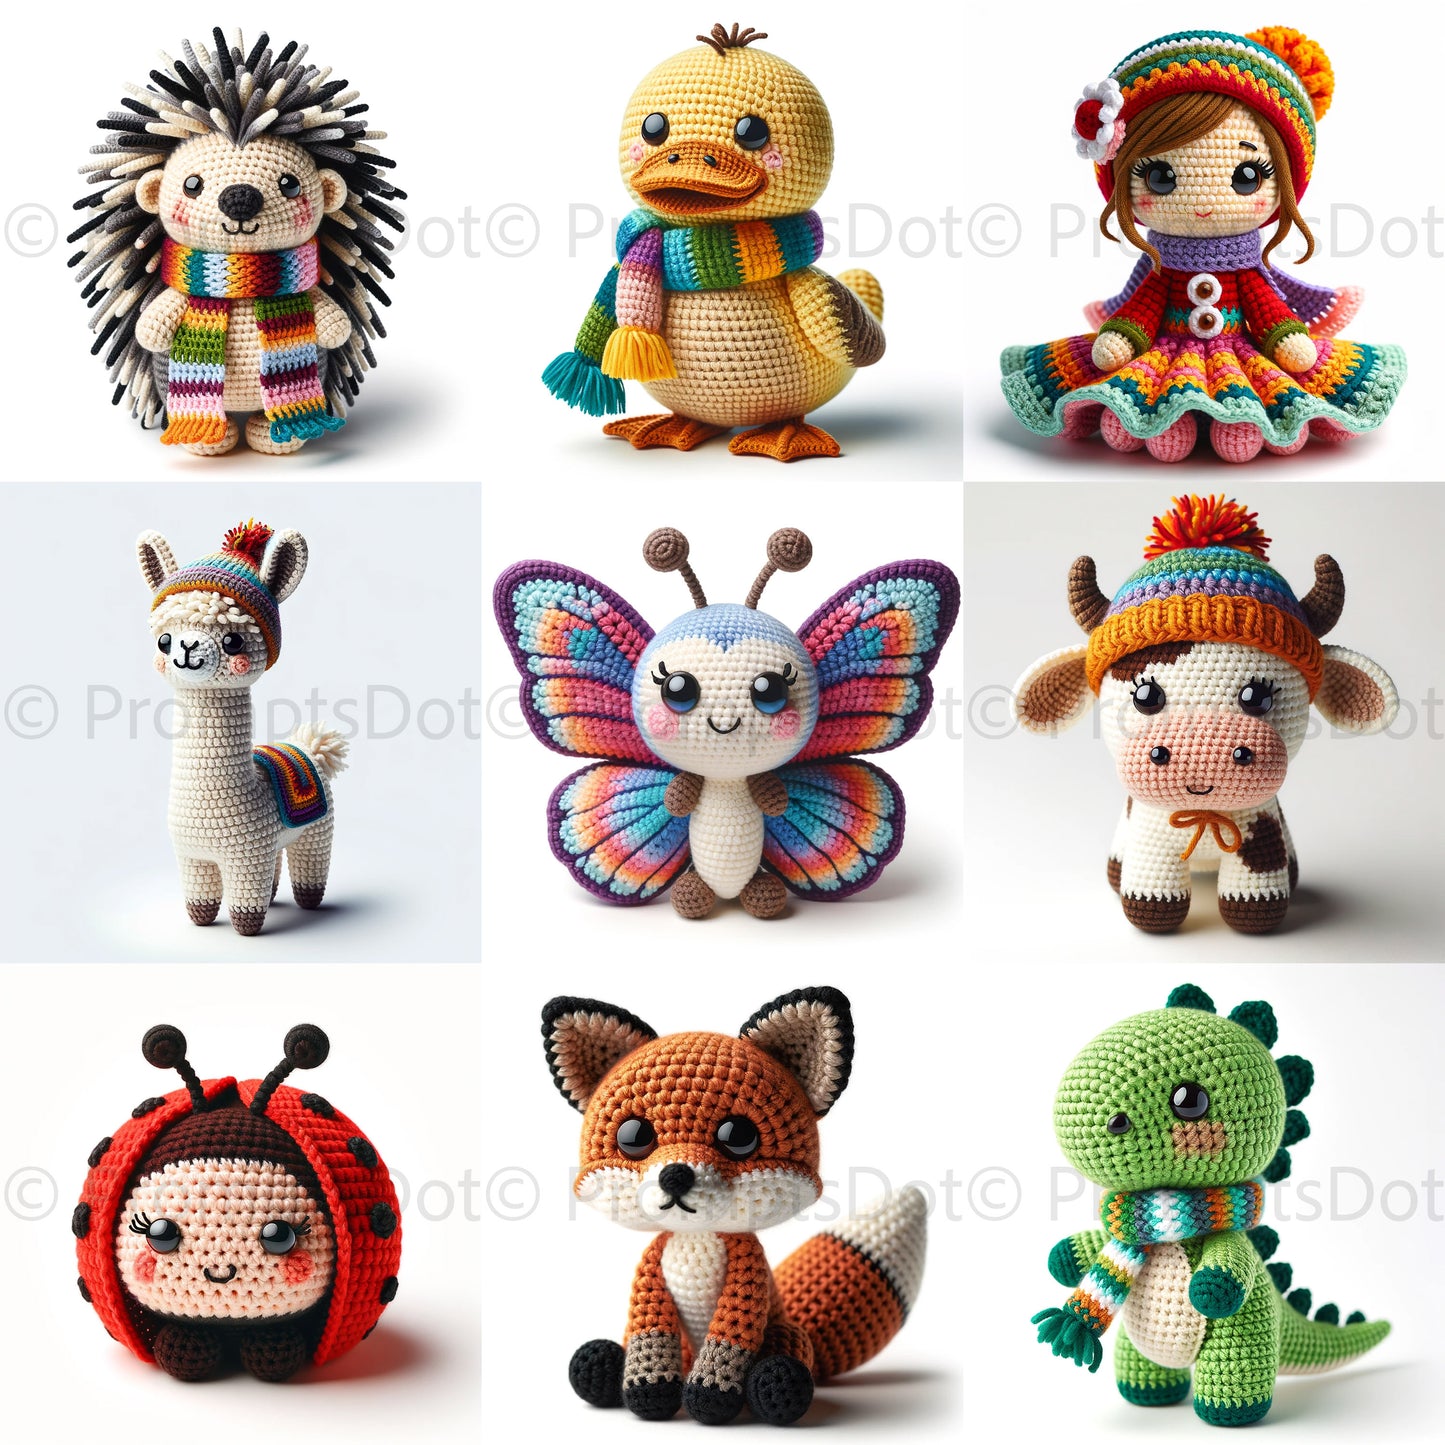 DALLE3 DALLE Prompt for Knitted Crochet Toys Amigurumi Clipart